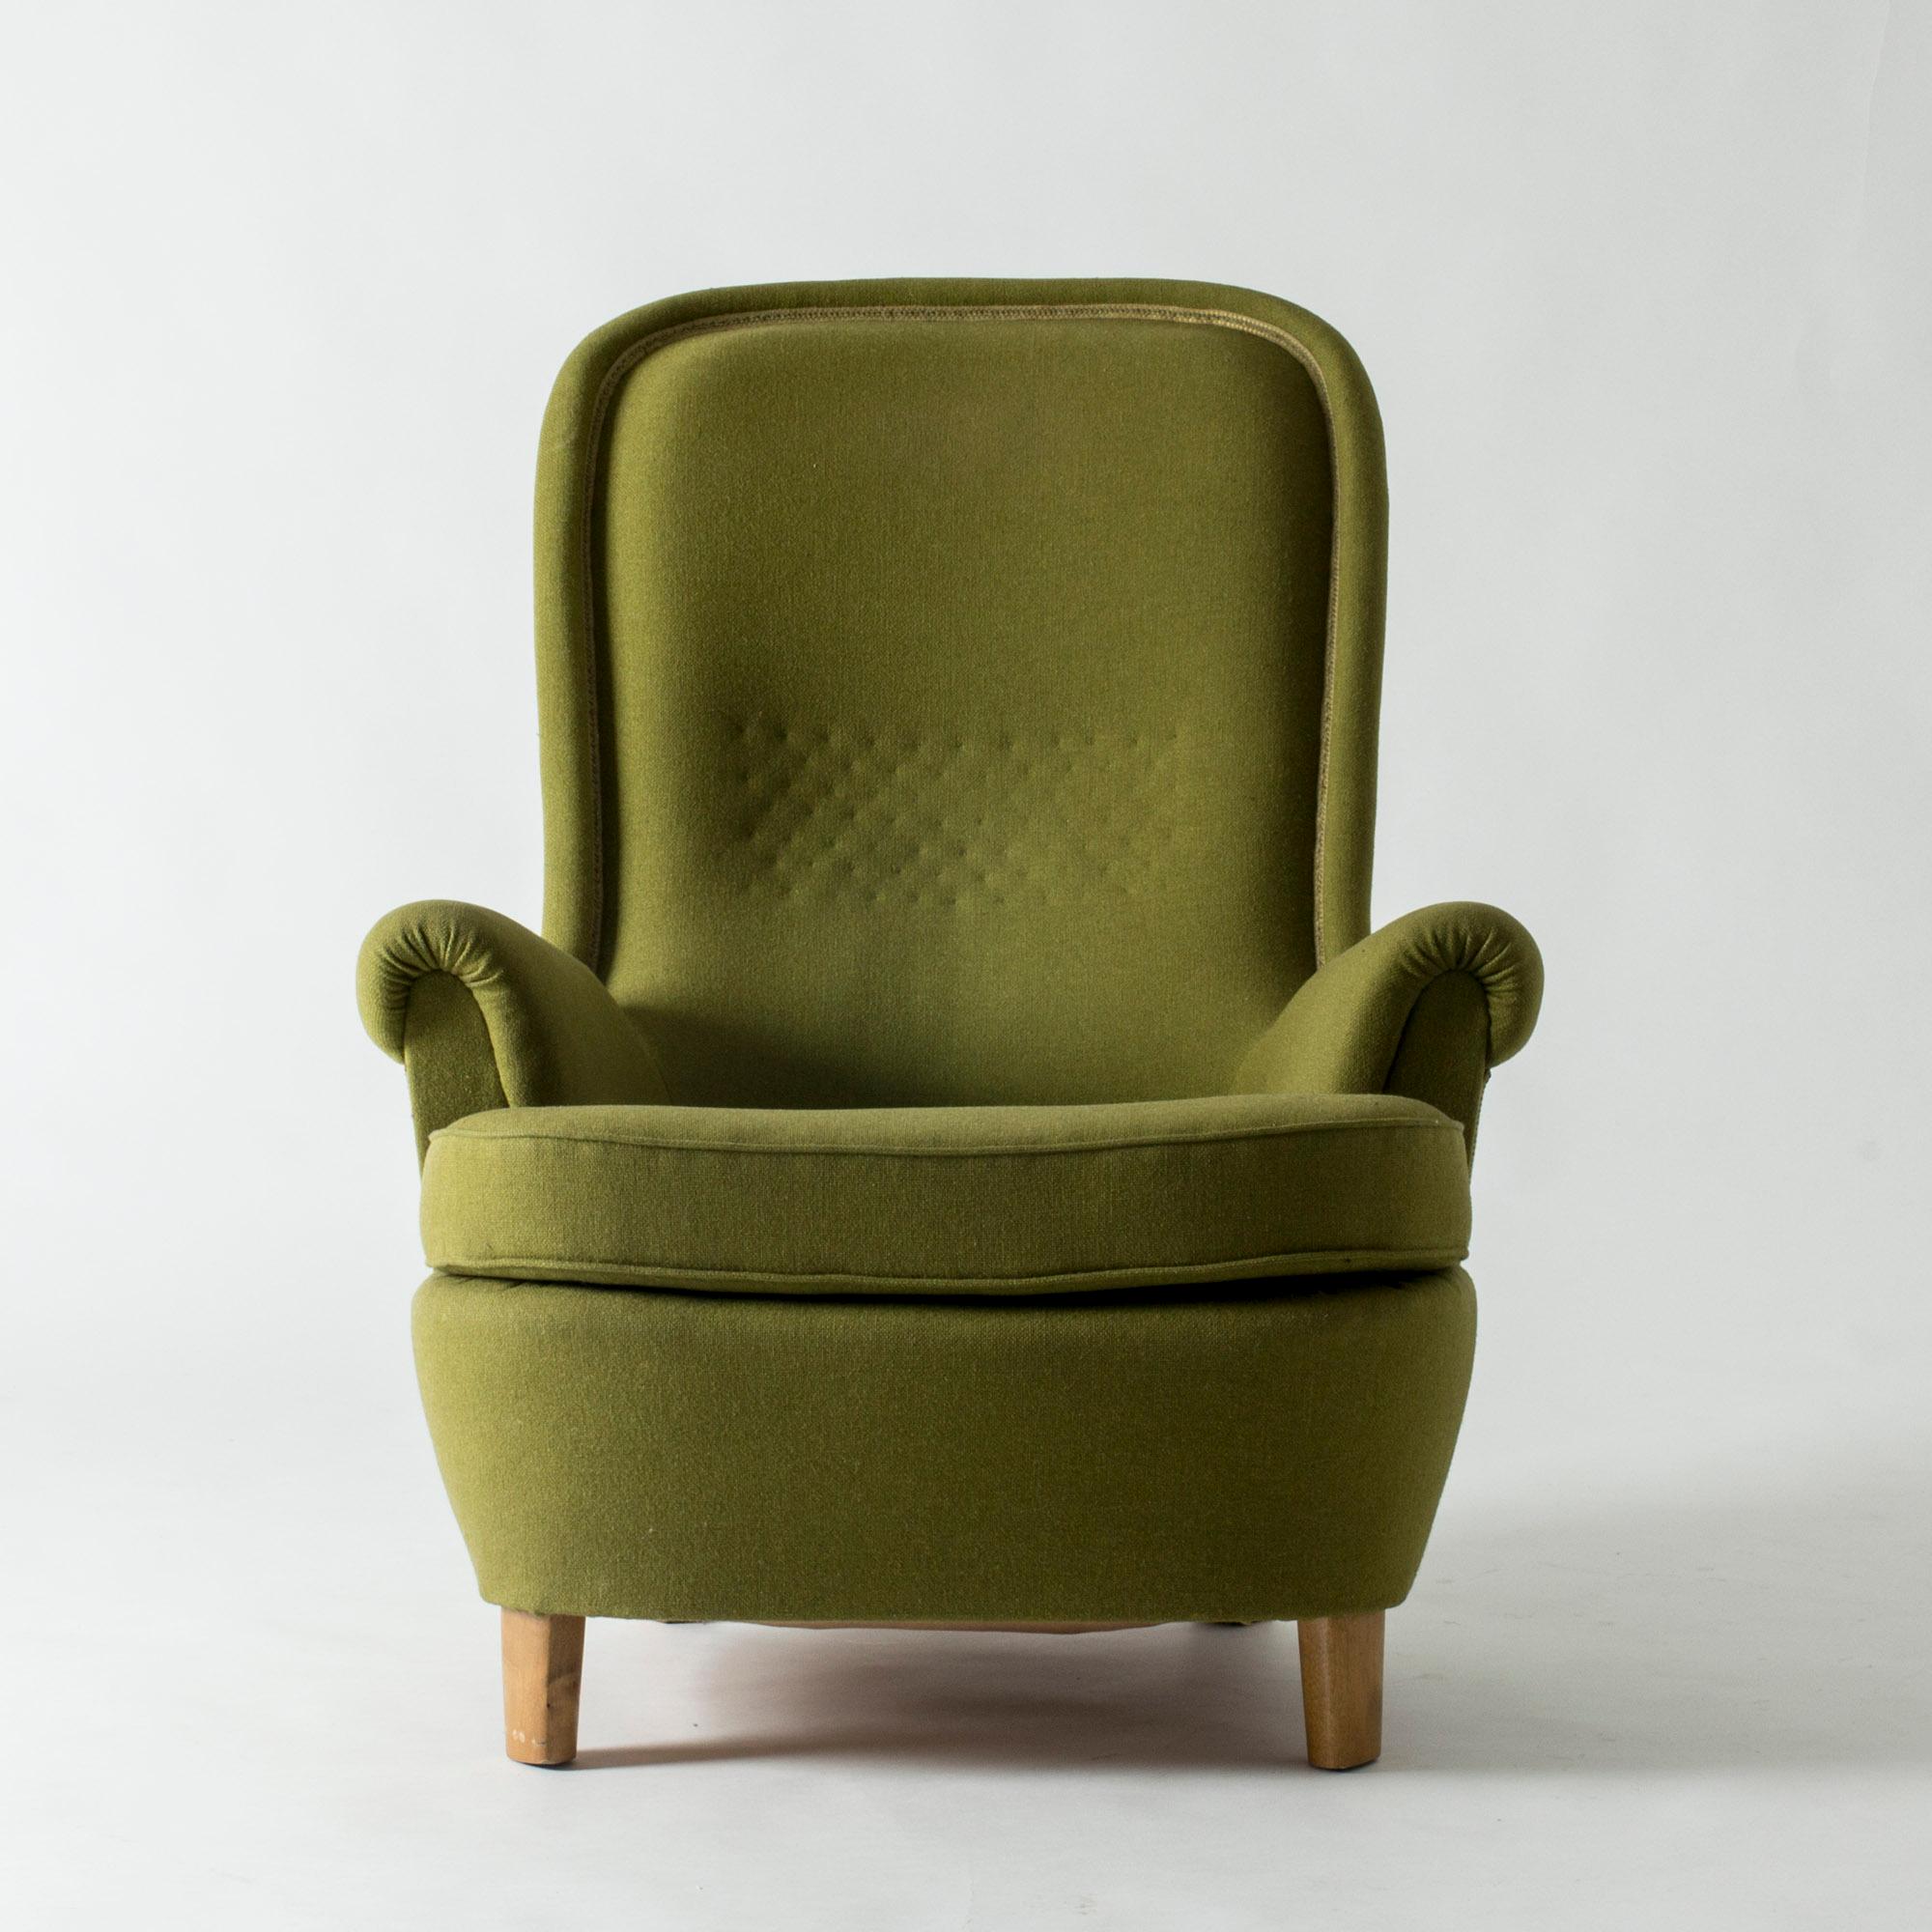 Imposing lounge chair by Carl-Axel Acking, designed in 1937 for the World Exhibition in Paris. Beautiful, oversized arched back and a laid back silhouette. Older upholstery.